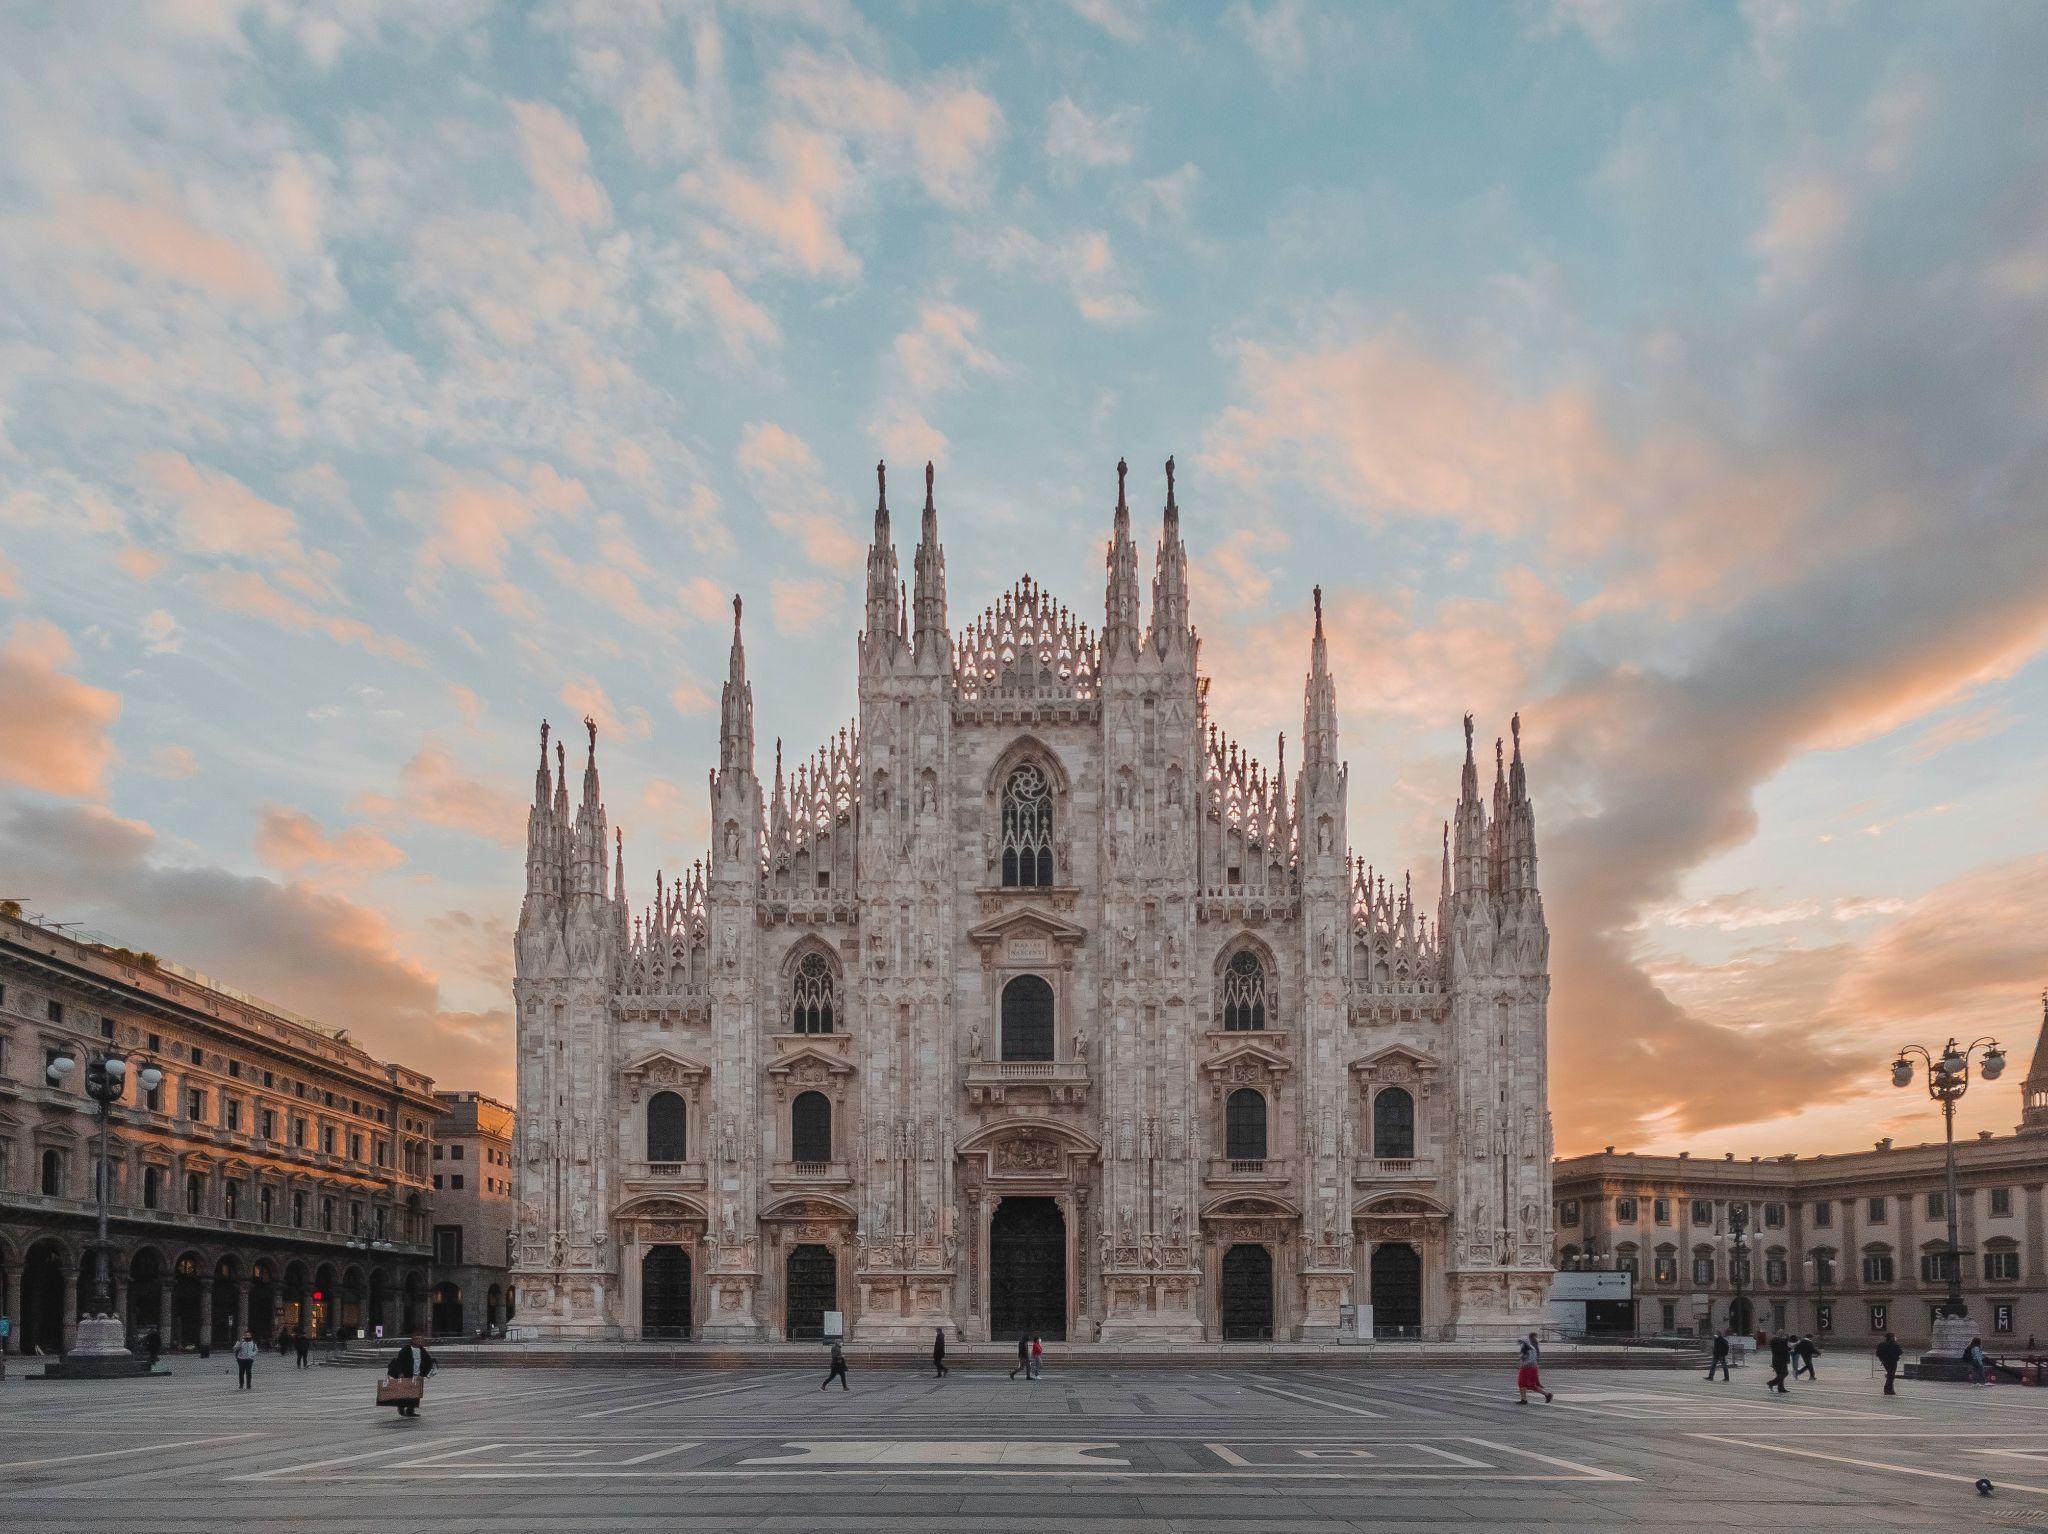 An image of Ancient cathedrals in Milan are a common dream destination